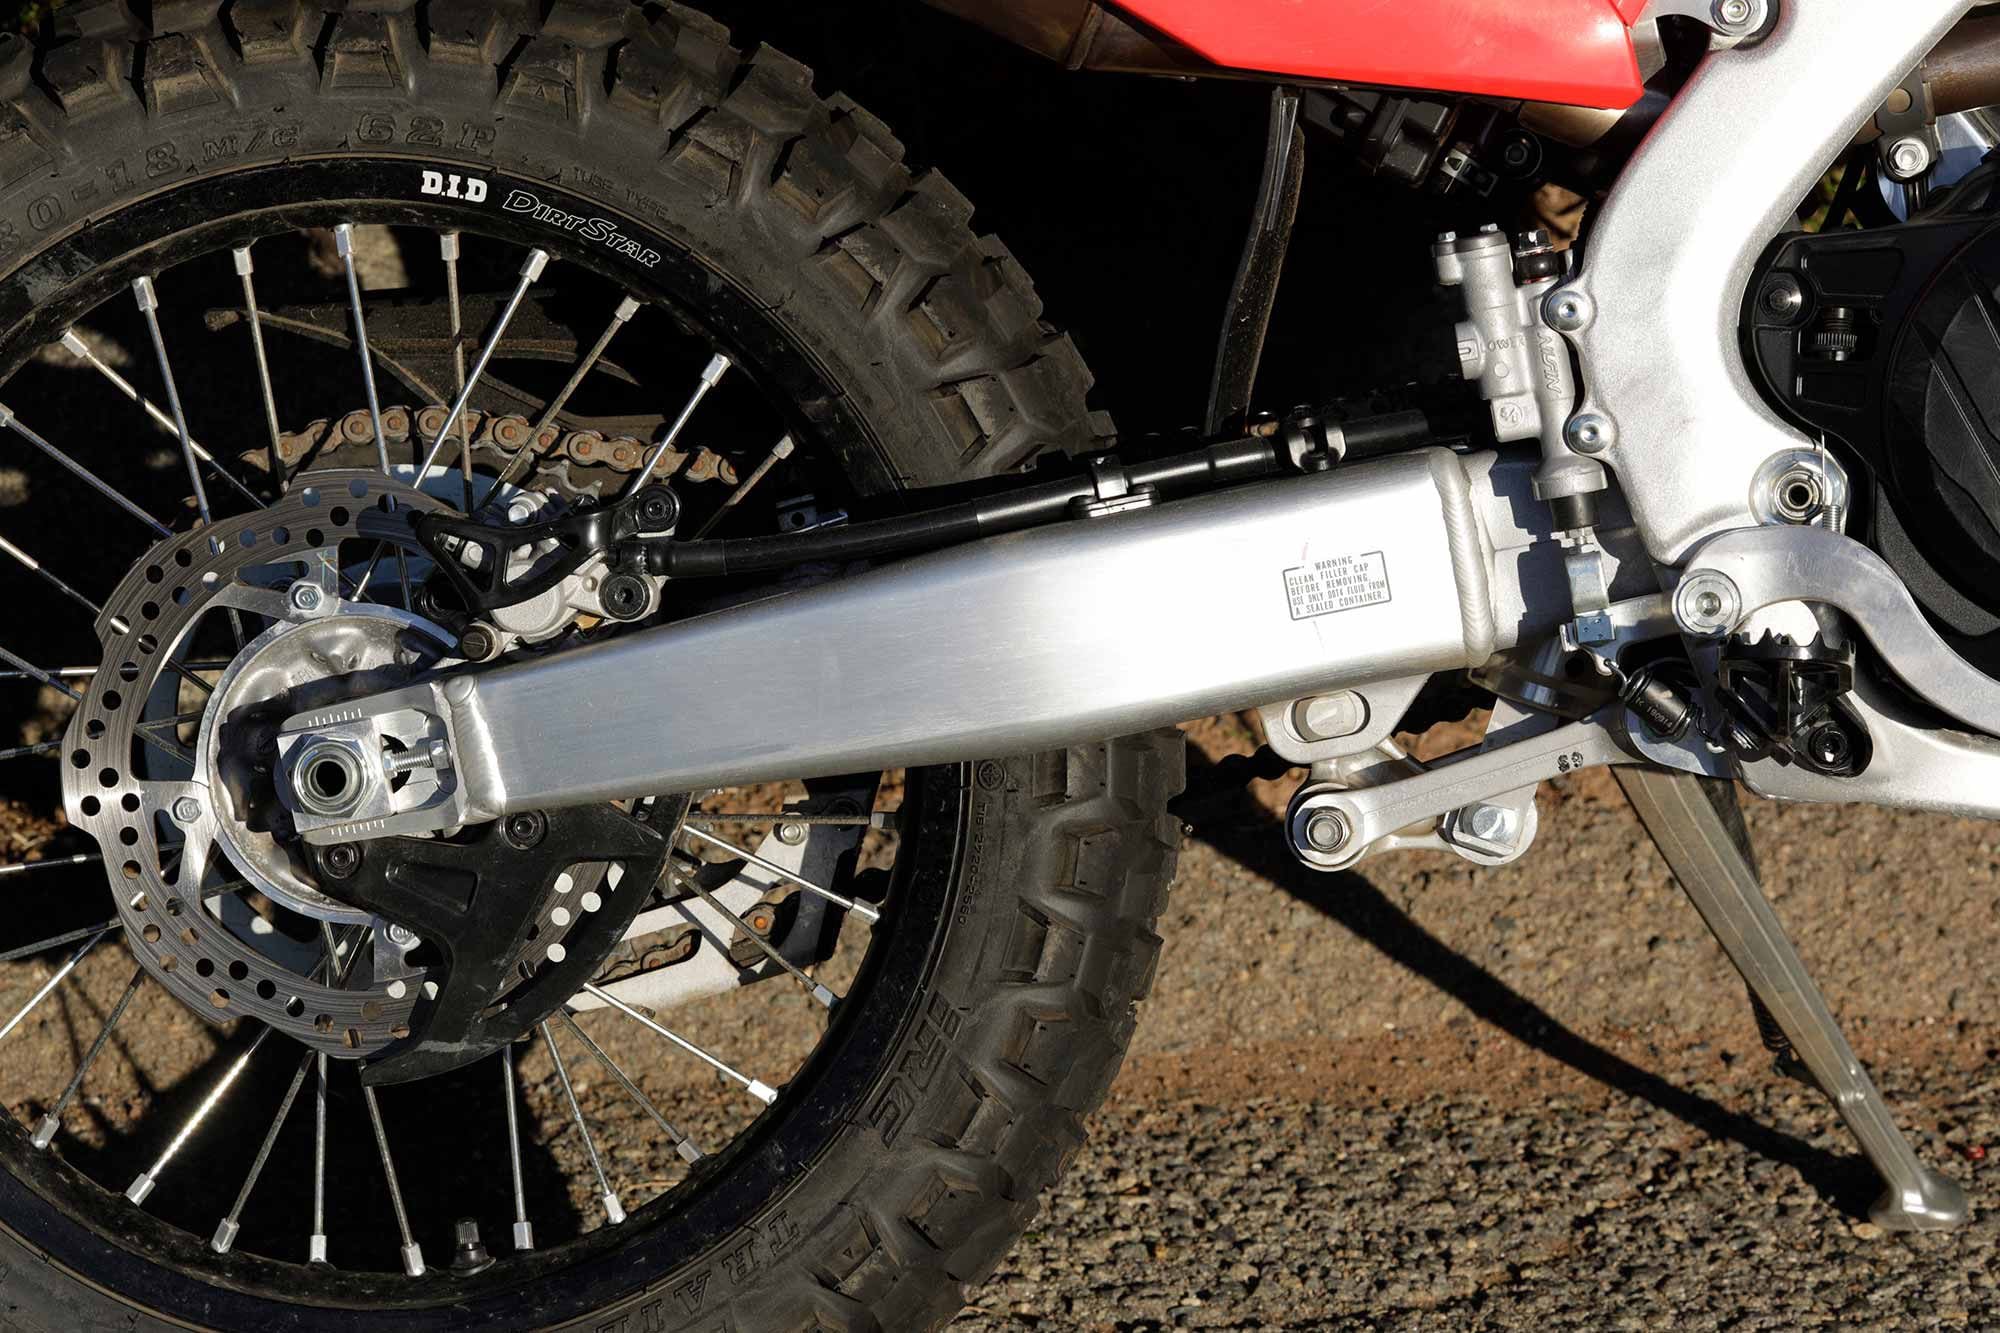 The CRF450RL shares the R’s swingarm with special noise damping material on the inside to help the RL ride more quietly on the street.